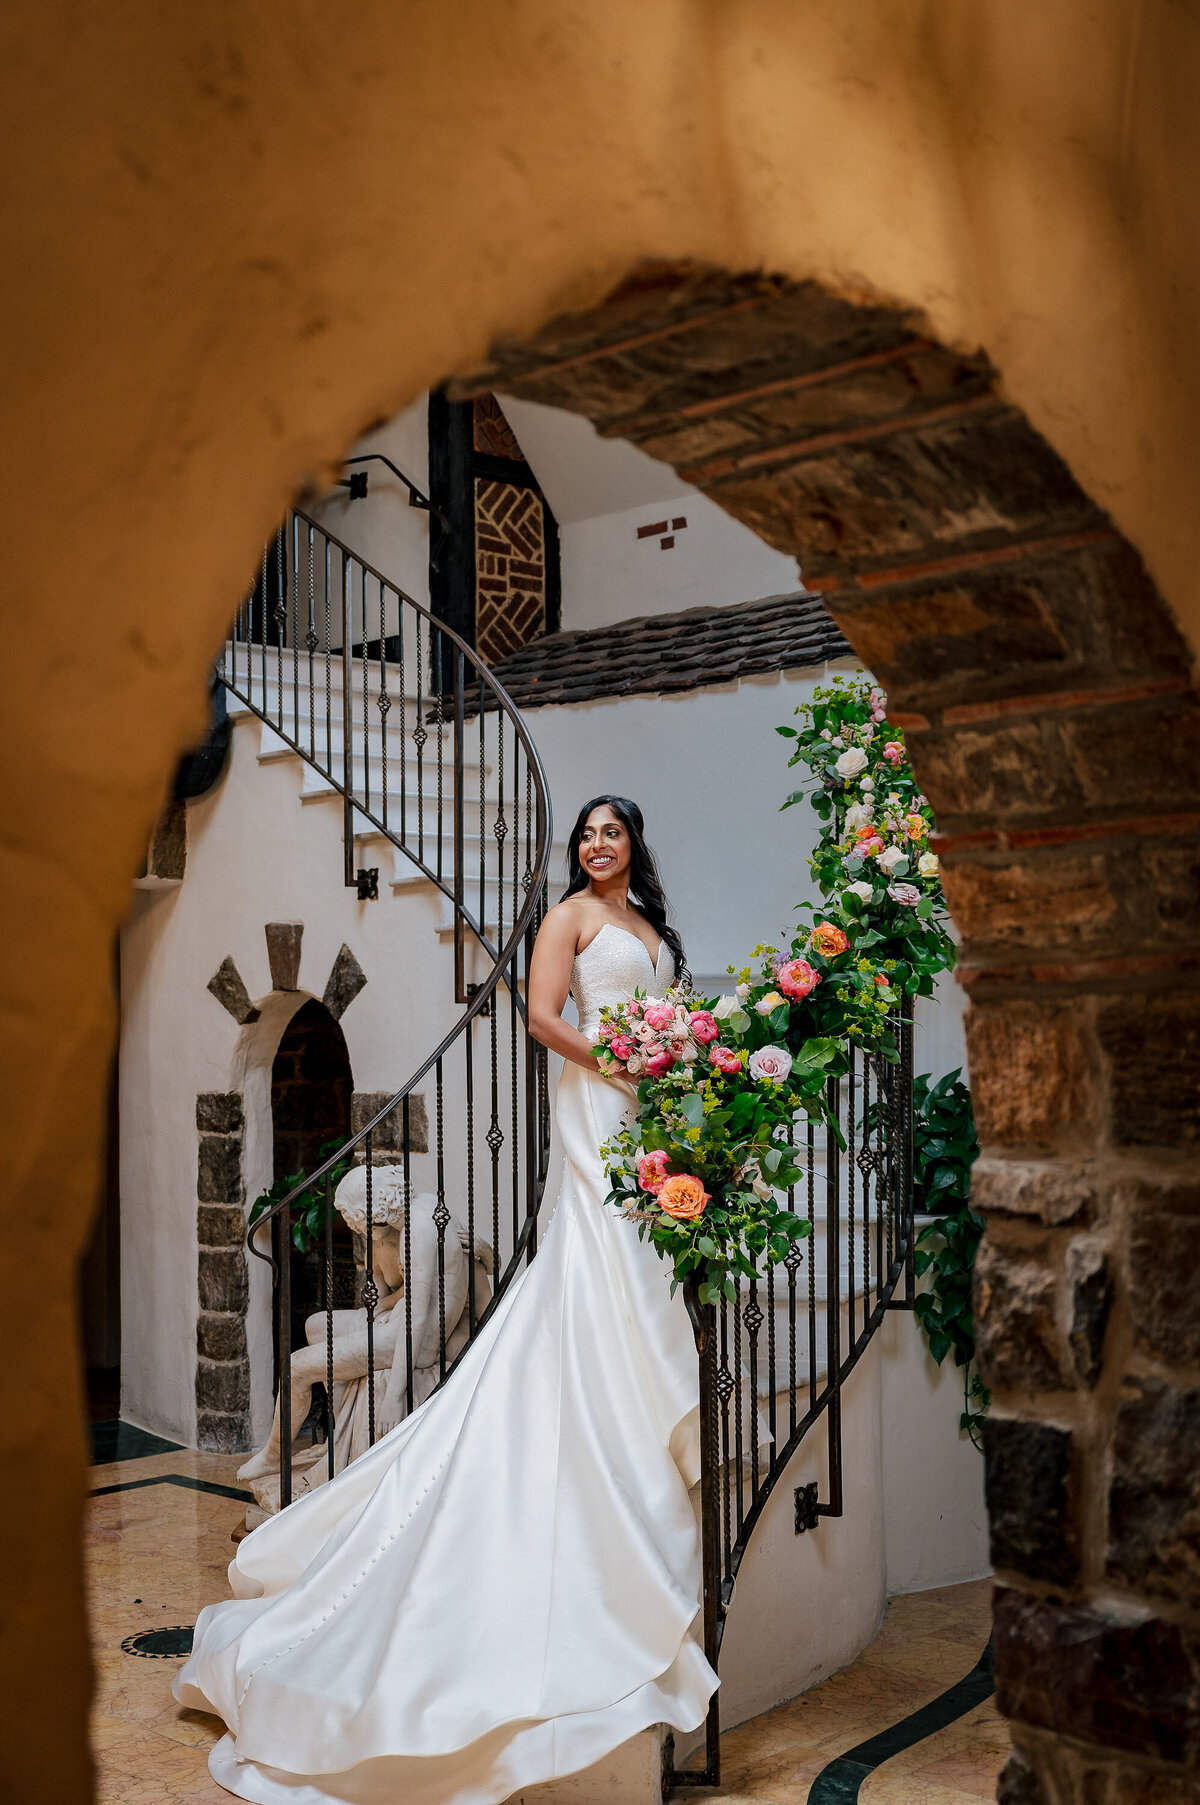 Find inspiring wedding photos from Pleasantdale Chateau by Ishan Fotografi.